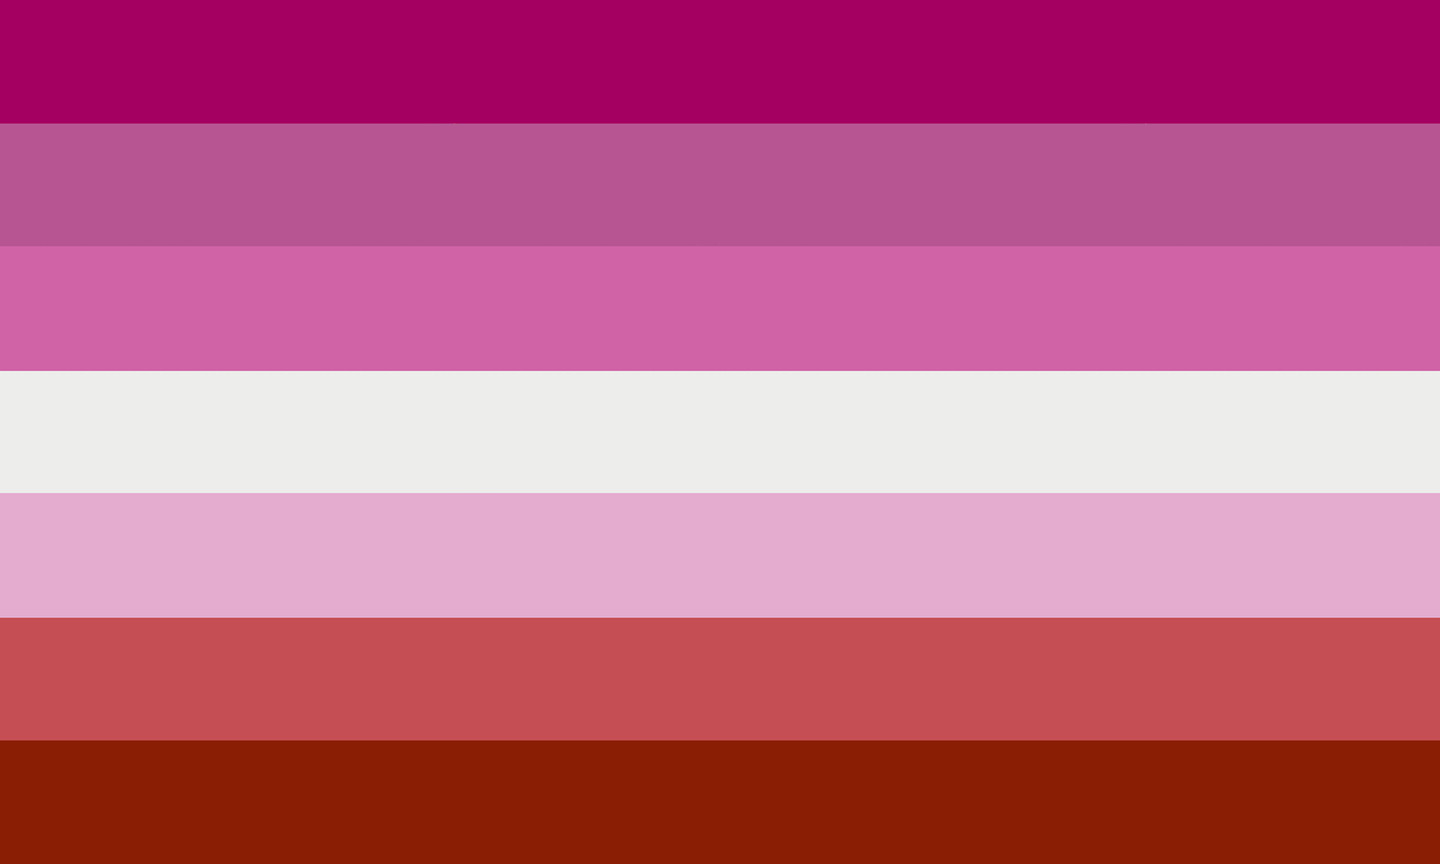 Pride/Equality Flags – LESBIAN